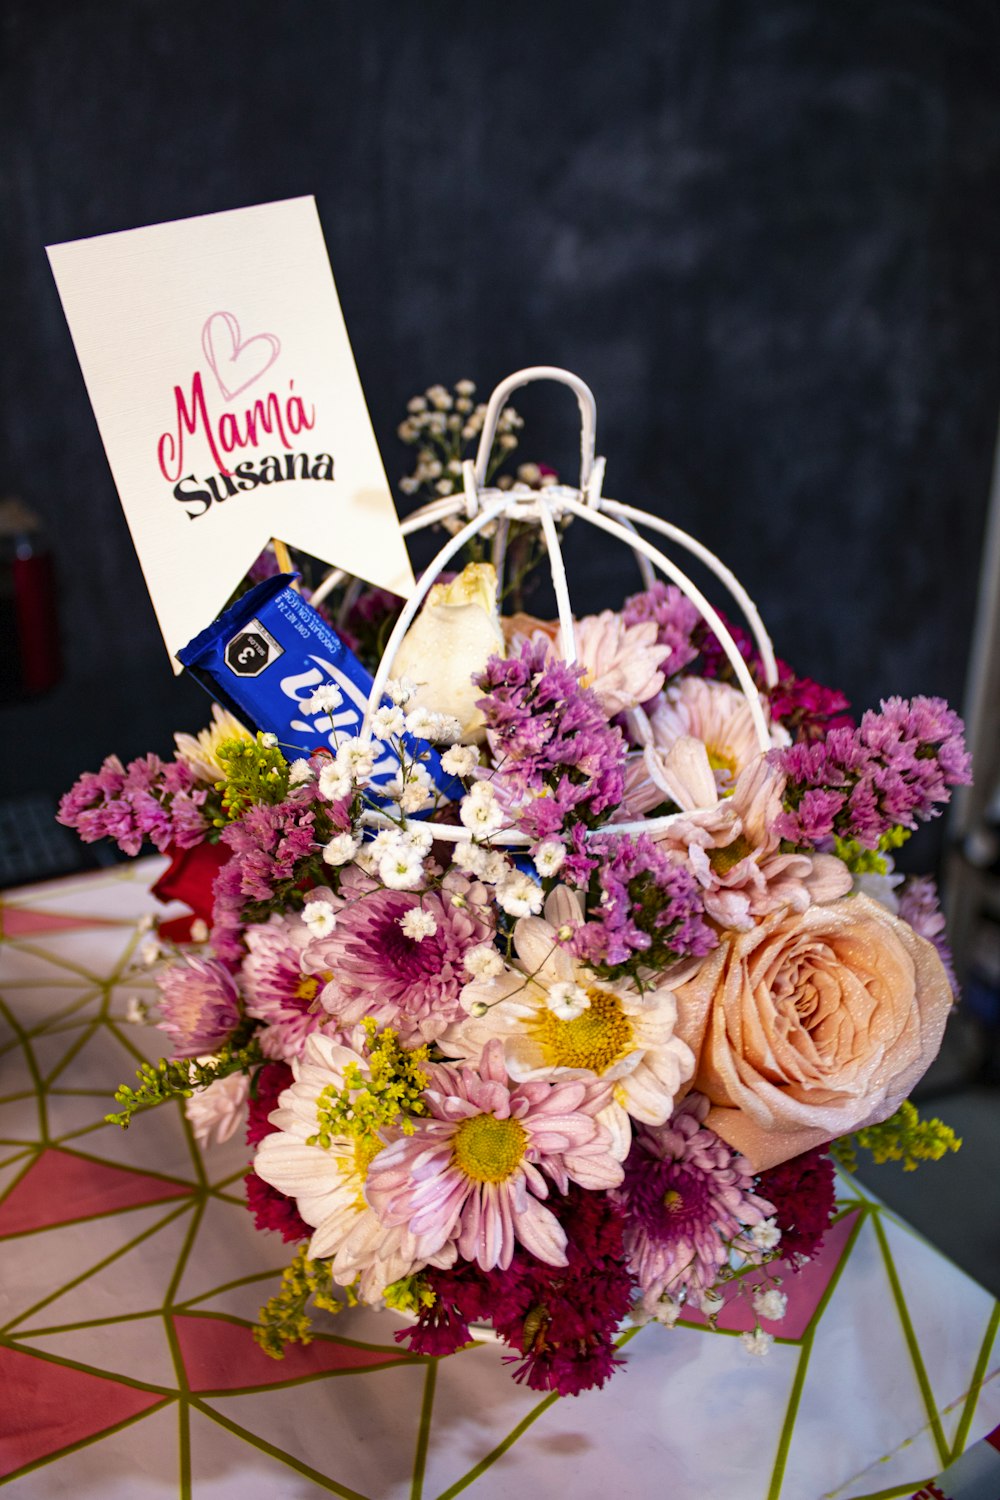 a bouquet of flowers and chocolates on a table